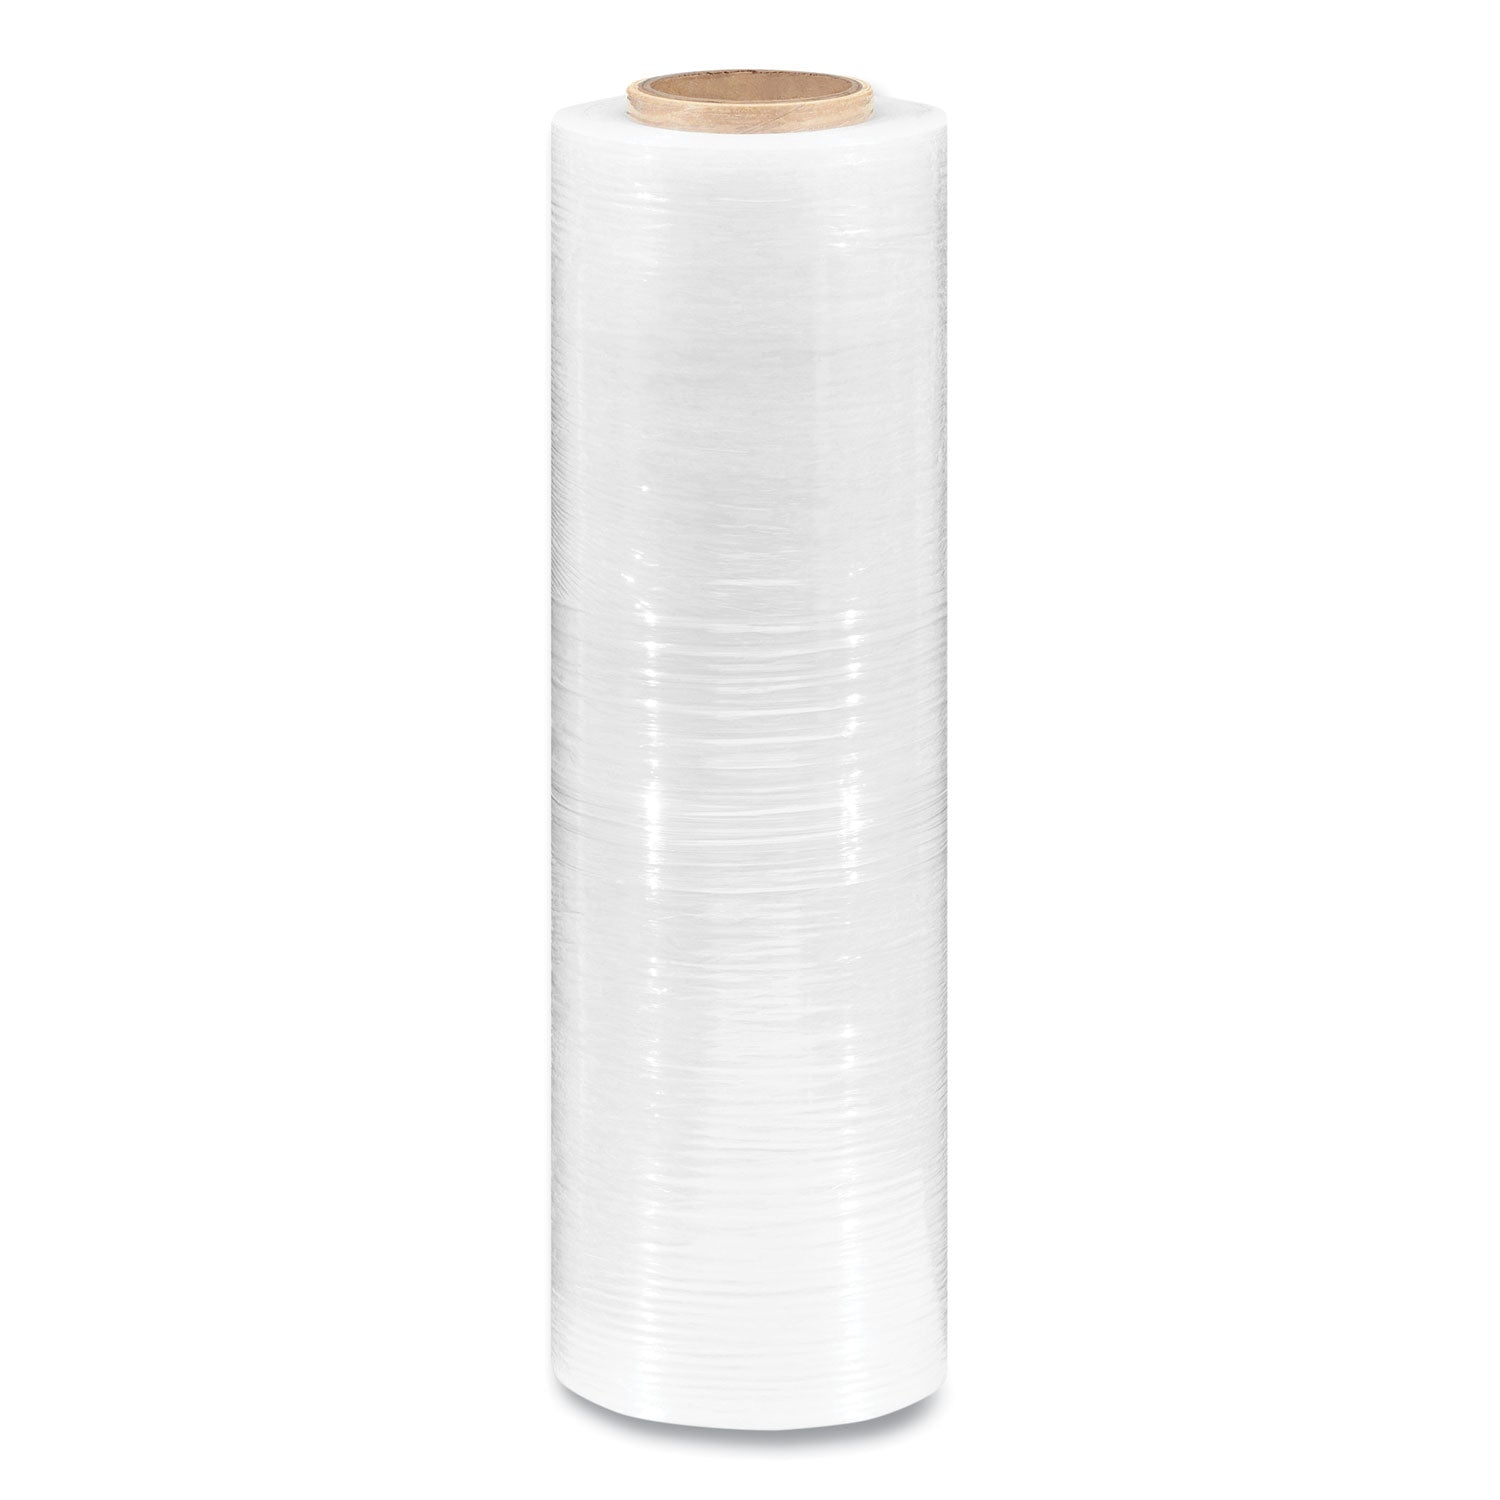 extended-core-blown-stretch-wrap-18-x-1500-ft-79-gauge-clear-4-carton_cwz687958 - 2